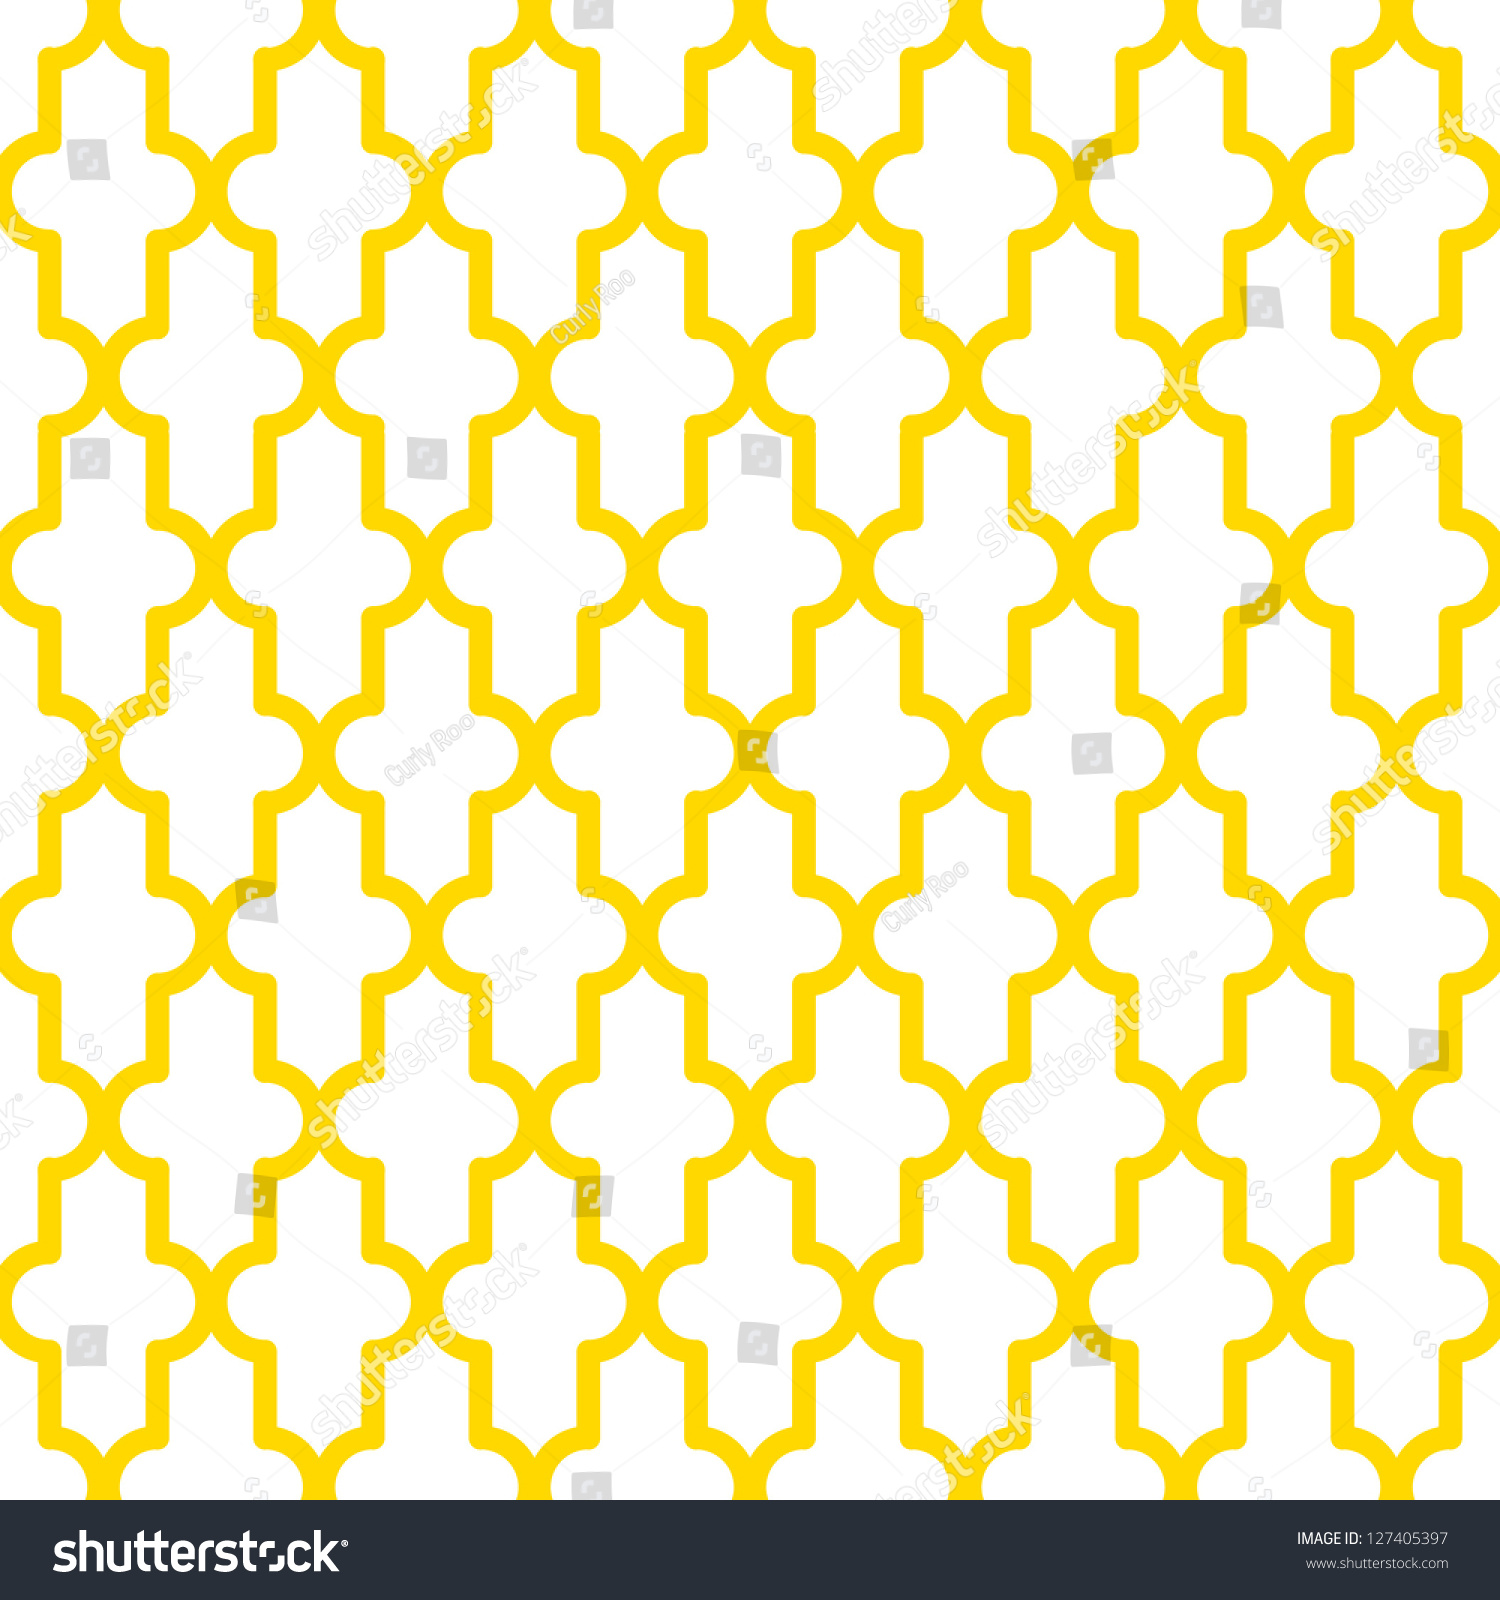 SEAMLESS GEOMETRIC PATTER / BACKGROUND DESIGN. Modern stylish texture. Repeating illustration file. Can be used for prints, textiles, website blogs etc. #127405397